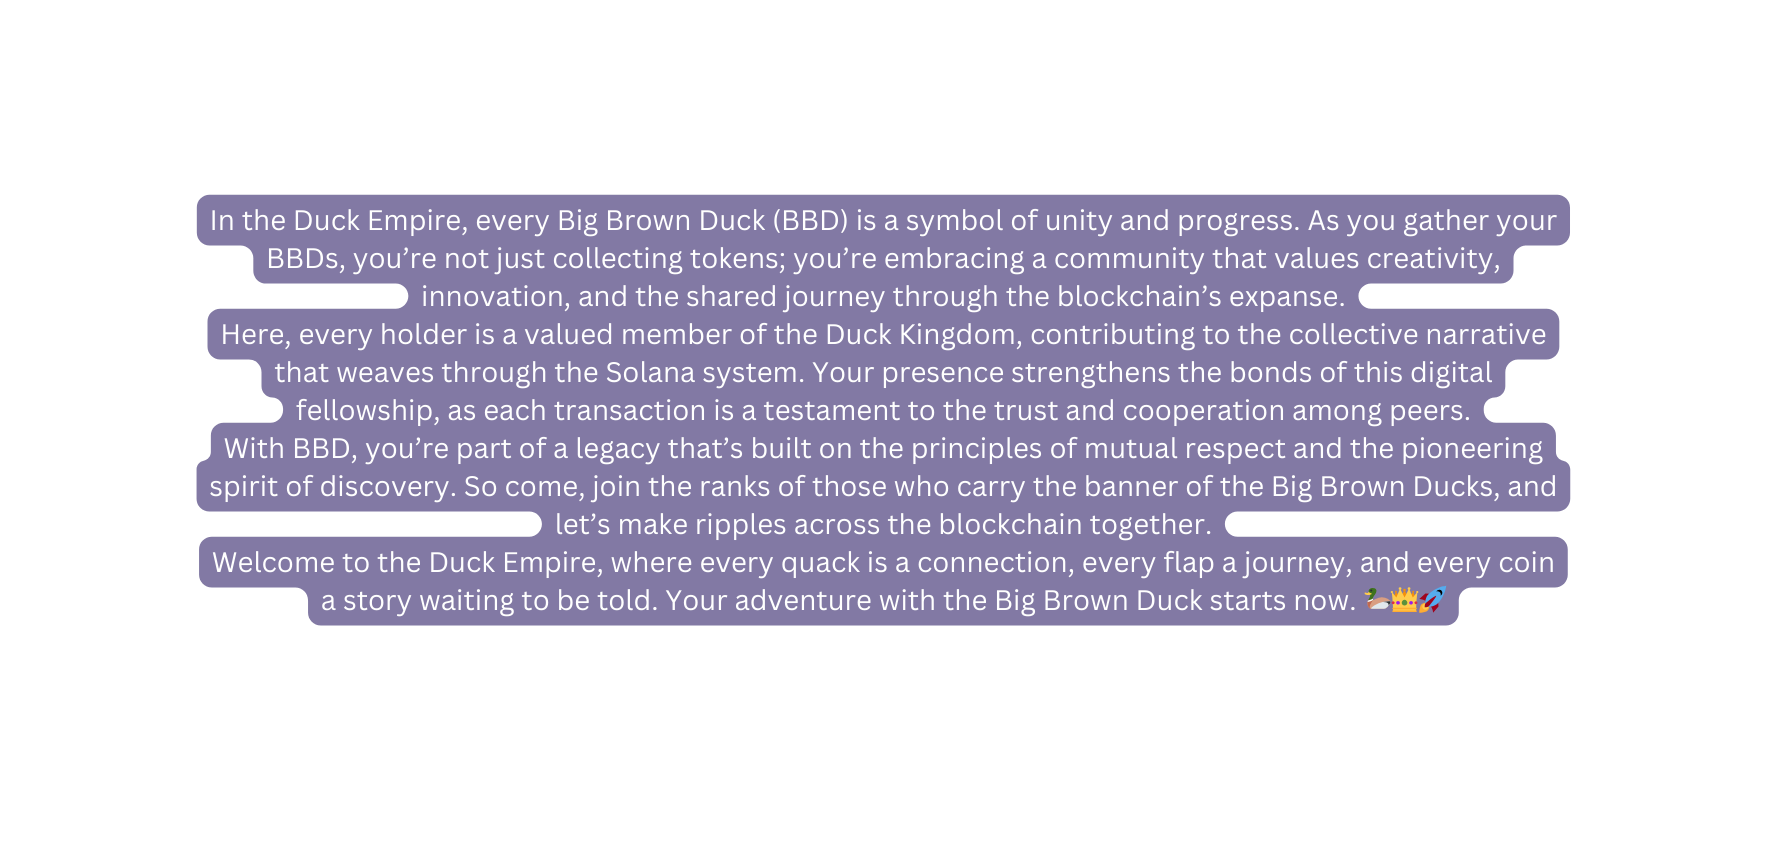 In the Duck Empire every Big Brown Duck BBD is a symbol of unity and progress As you gather your BBDs you re not just collecting tokens you re embracing a community that values creativity innovation and the shared journey through the blockchain s expanse Here every holder is a valued member of the Duck Kingdom contributing to the collective narrative that weaves through the Solana system Your presence strengthens the bonds of this digital fellowship as each transaction is a testament to the trust and cooperation among peers With BBD you re part of a legacy that s built on the principles of mutual respect and the pioneering spirit of discovery So come join the ranks of those who carry the banner of the Big Brown Ducks and let s make ripples across the blockchain together Welcome to the Duck Empire where every quack is a connection every flap a journey and every coin a story waiting to be told Your adventure with the Big Brown Duck starts now